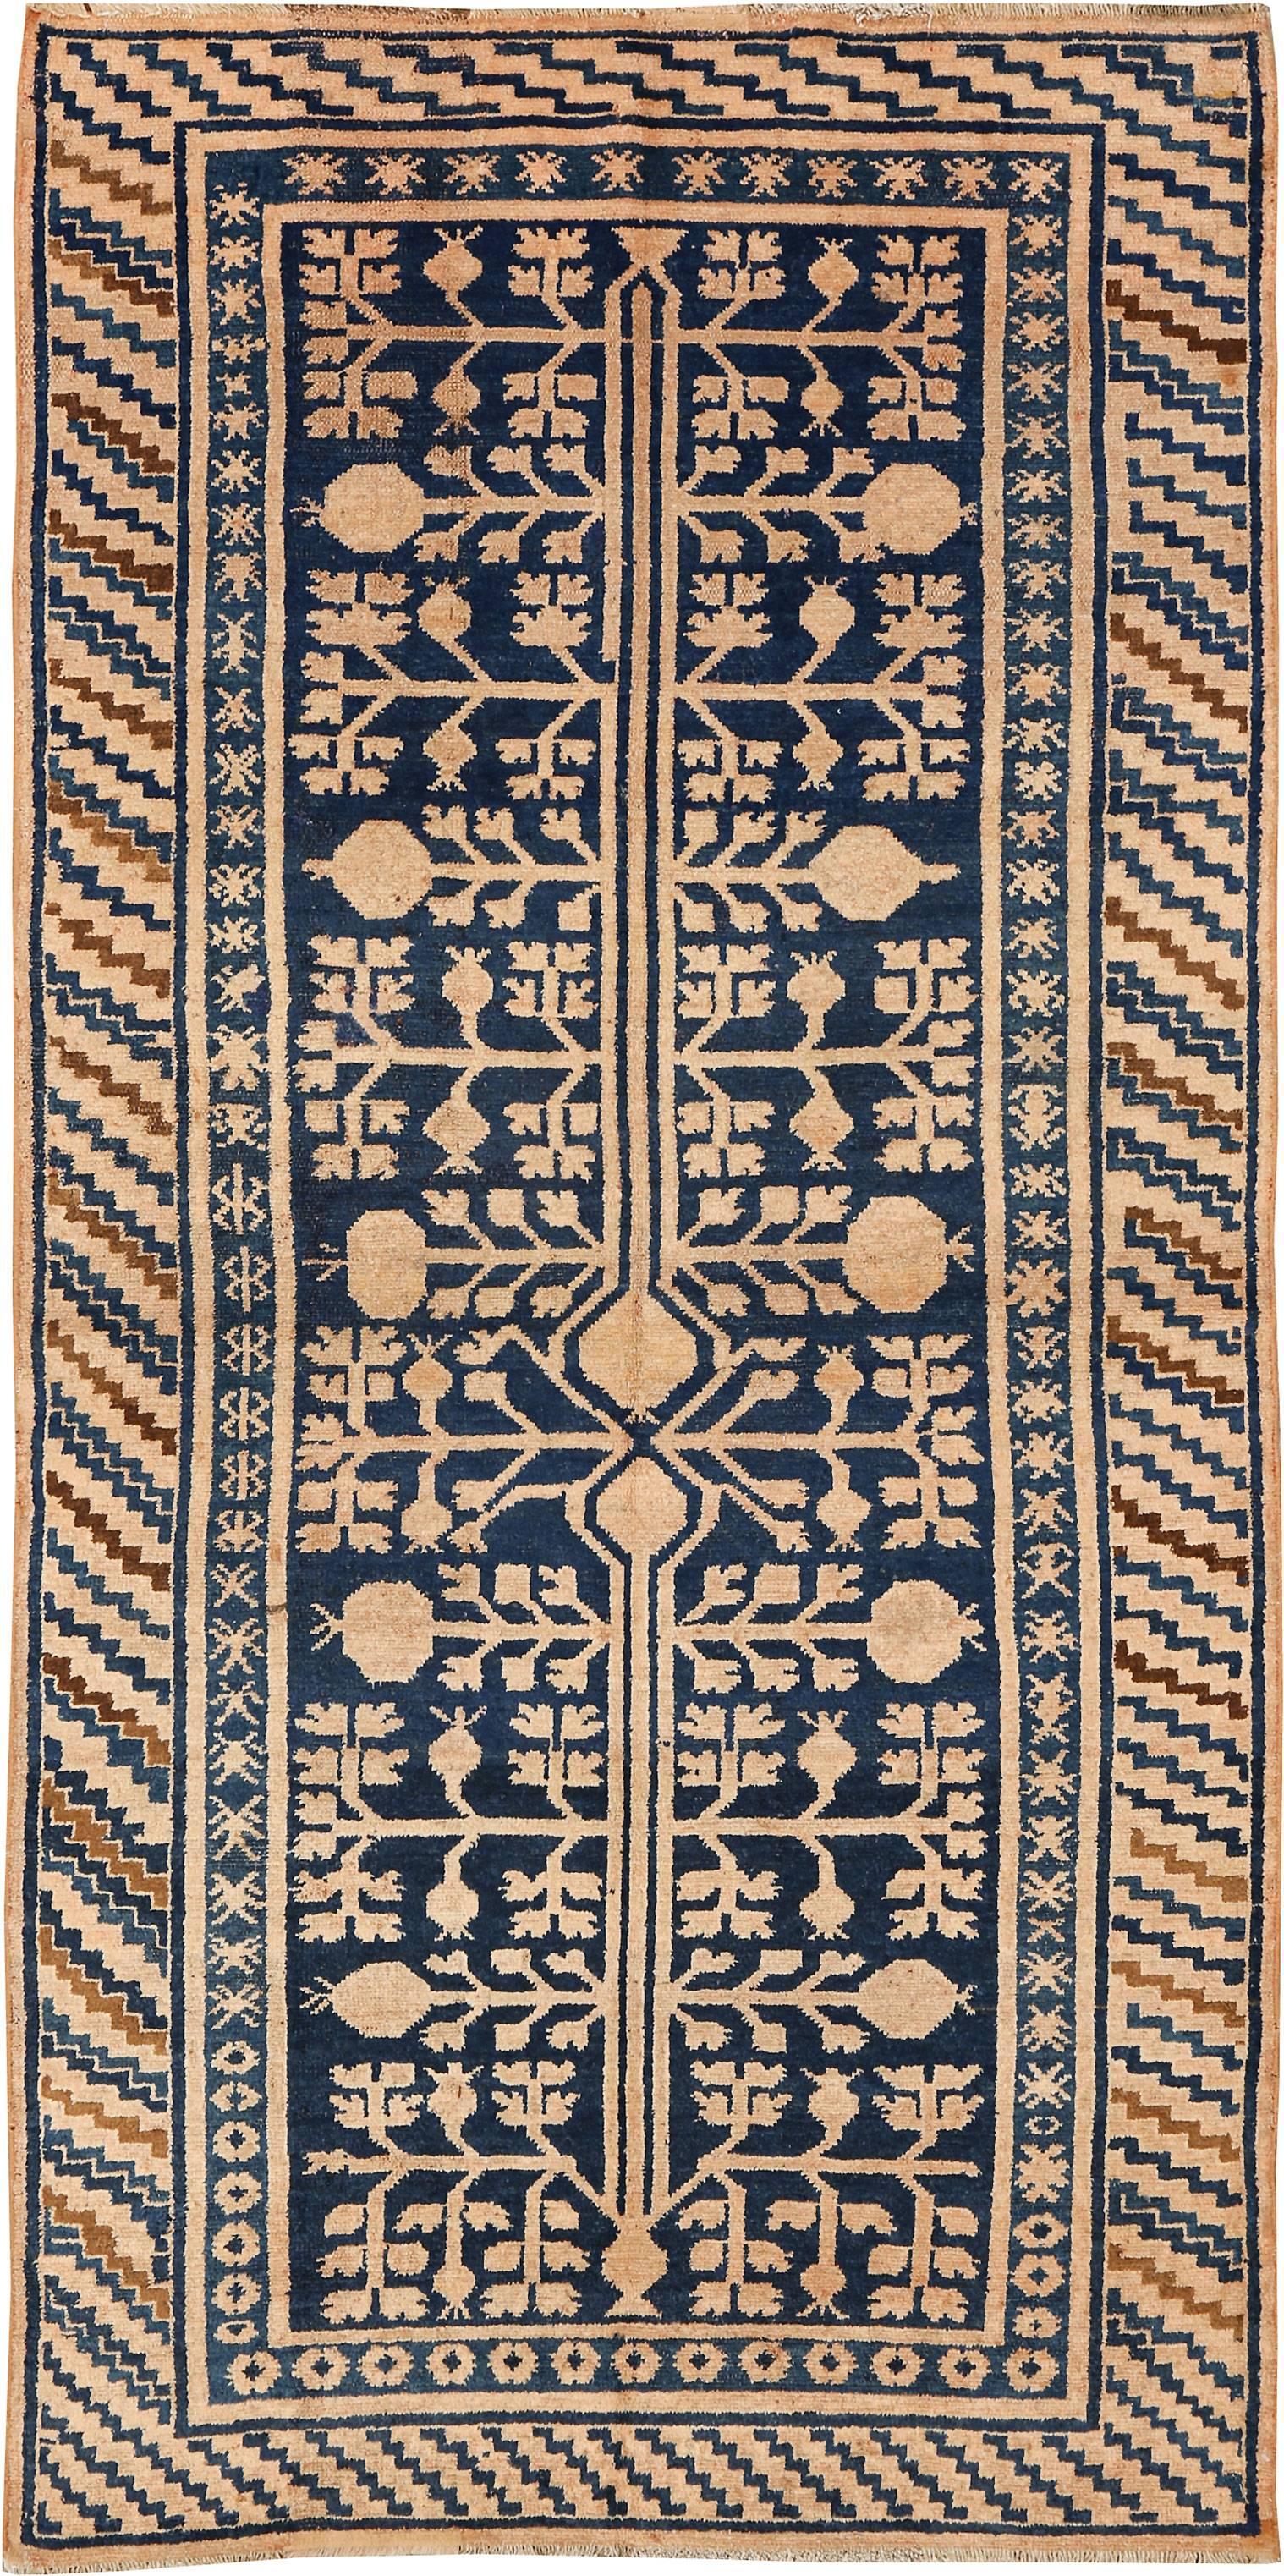 An antique East Turkestan Kirghiz carpet from the second quarter of the 20th century with a pomegranate design in camel and light terra cotta hues atop a navy background.